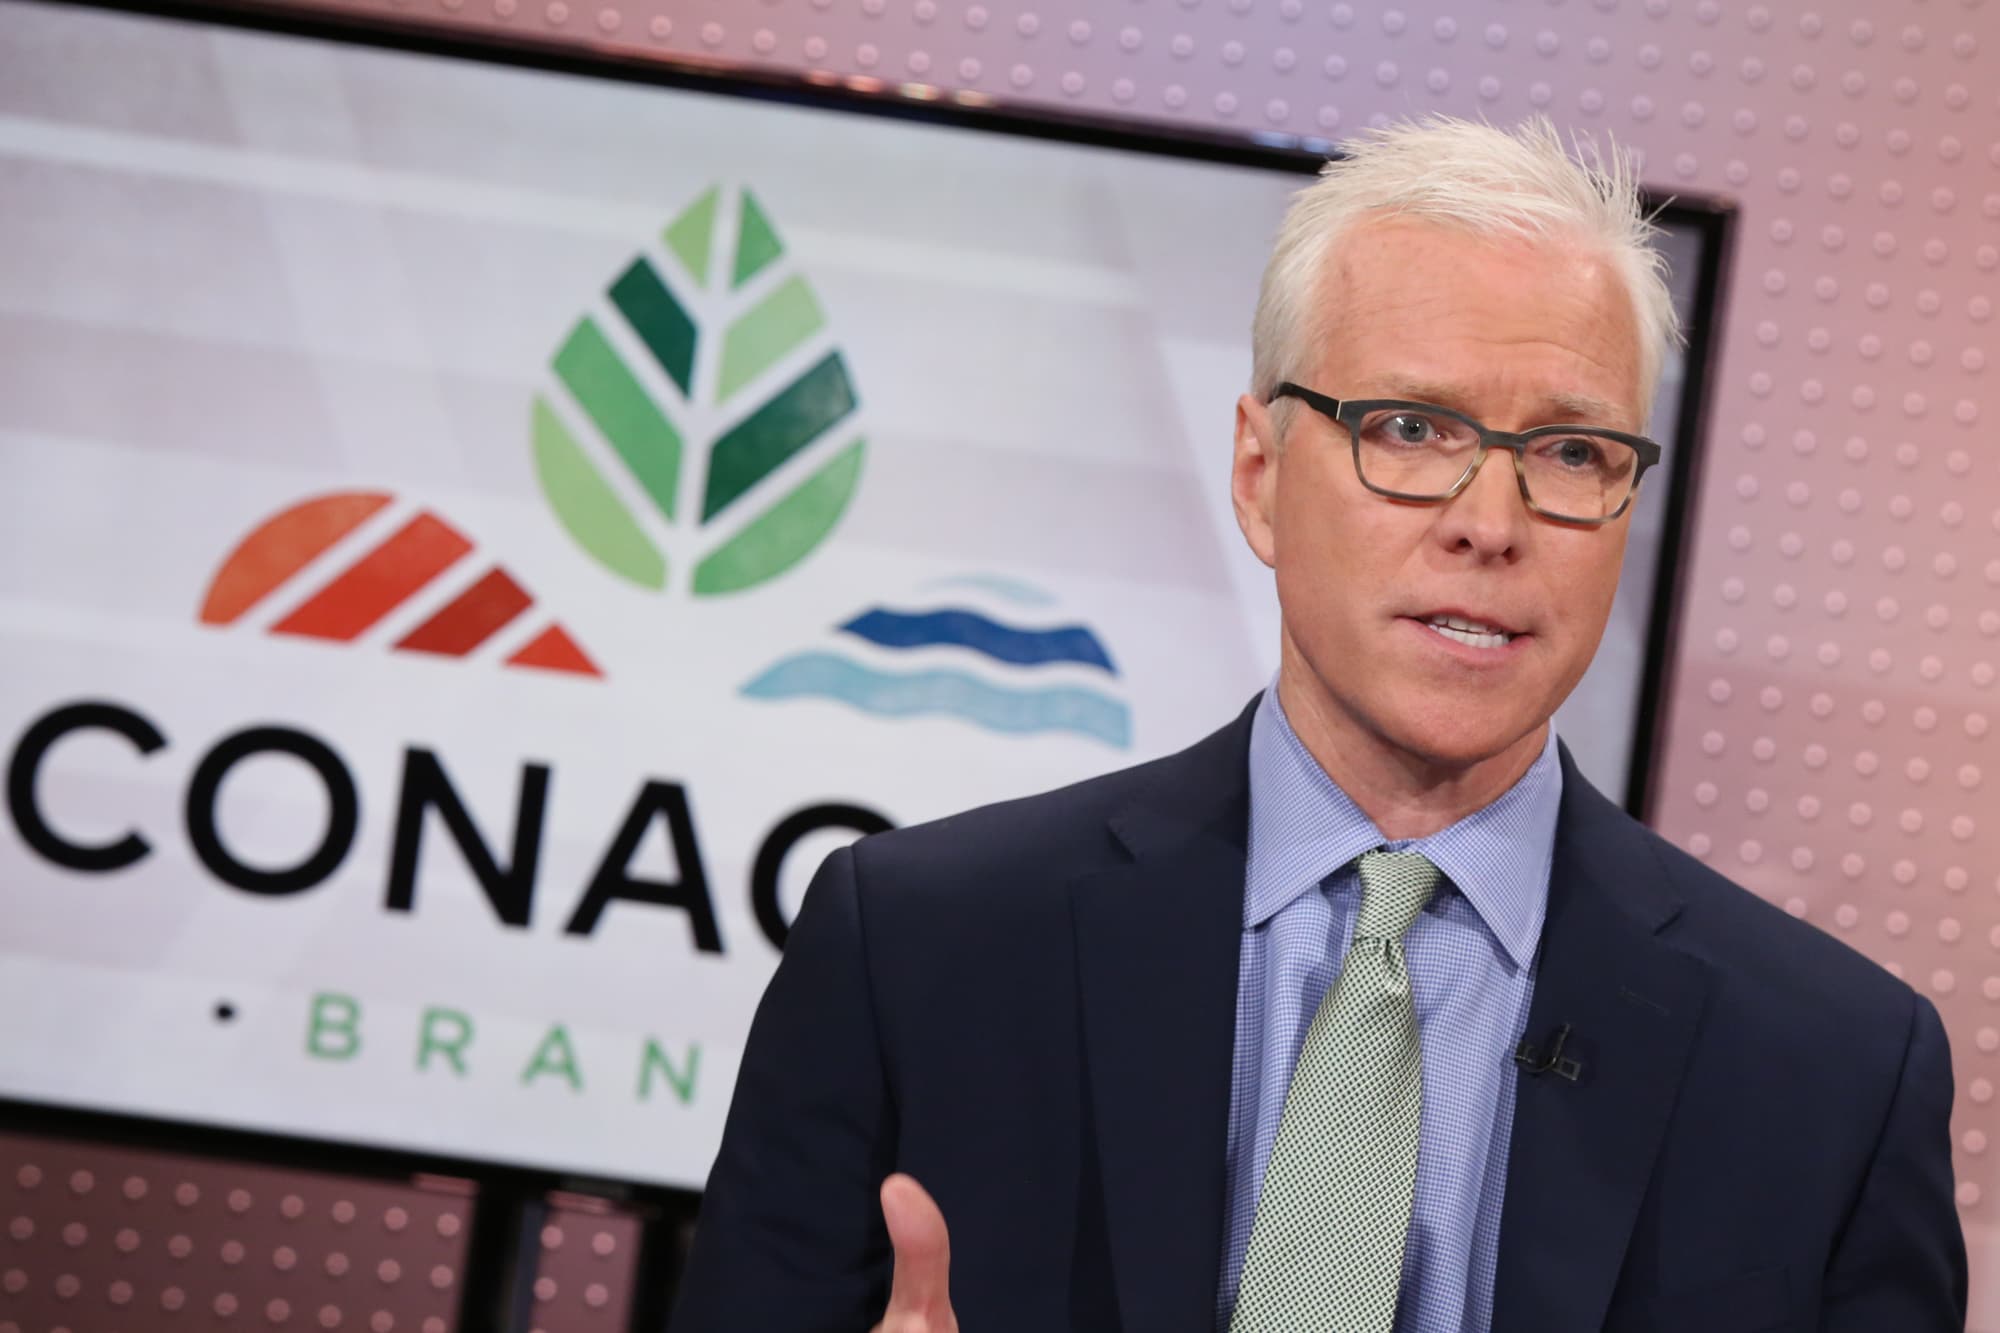 Conagra Brands CEO says inflation won’t go away even after Covid omicron wave passes – CNBC